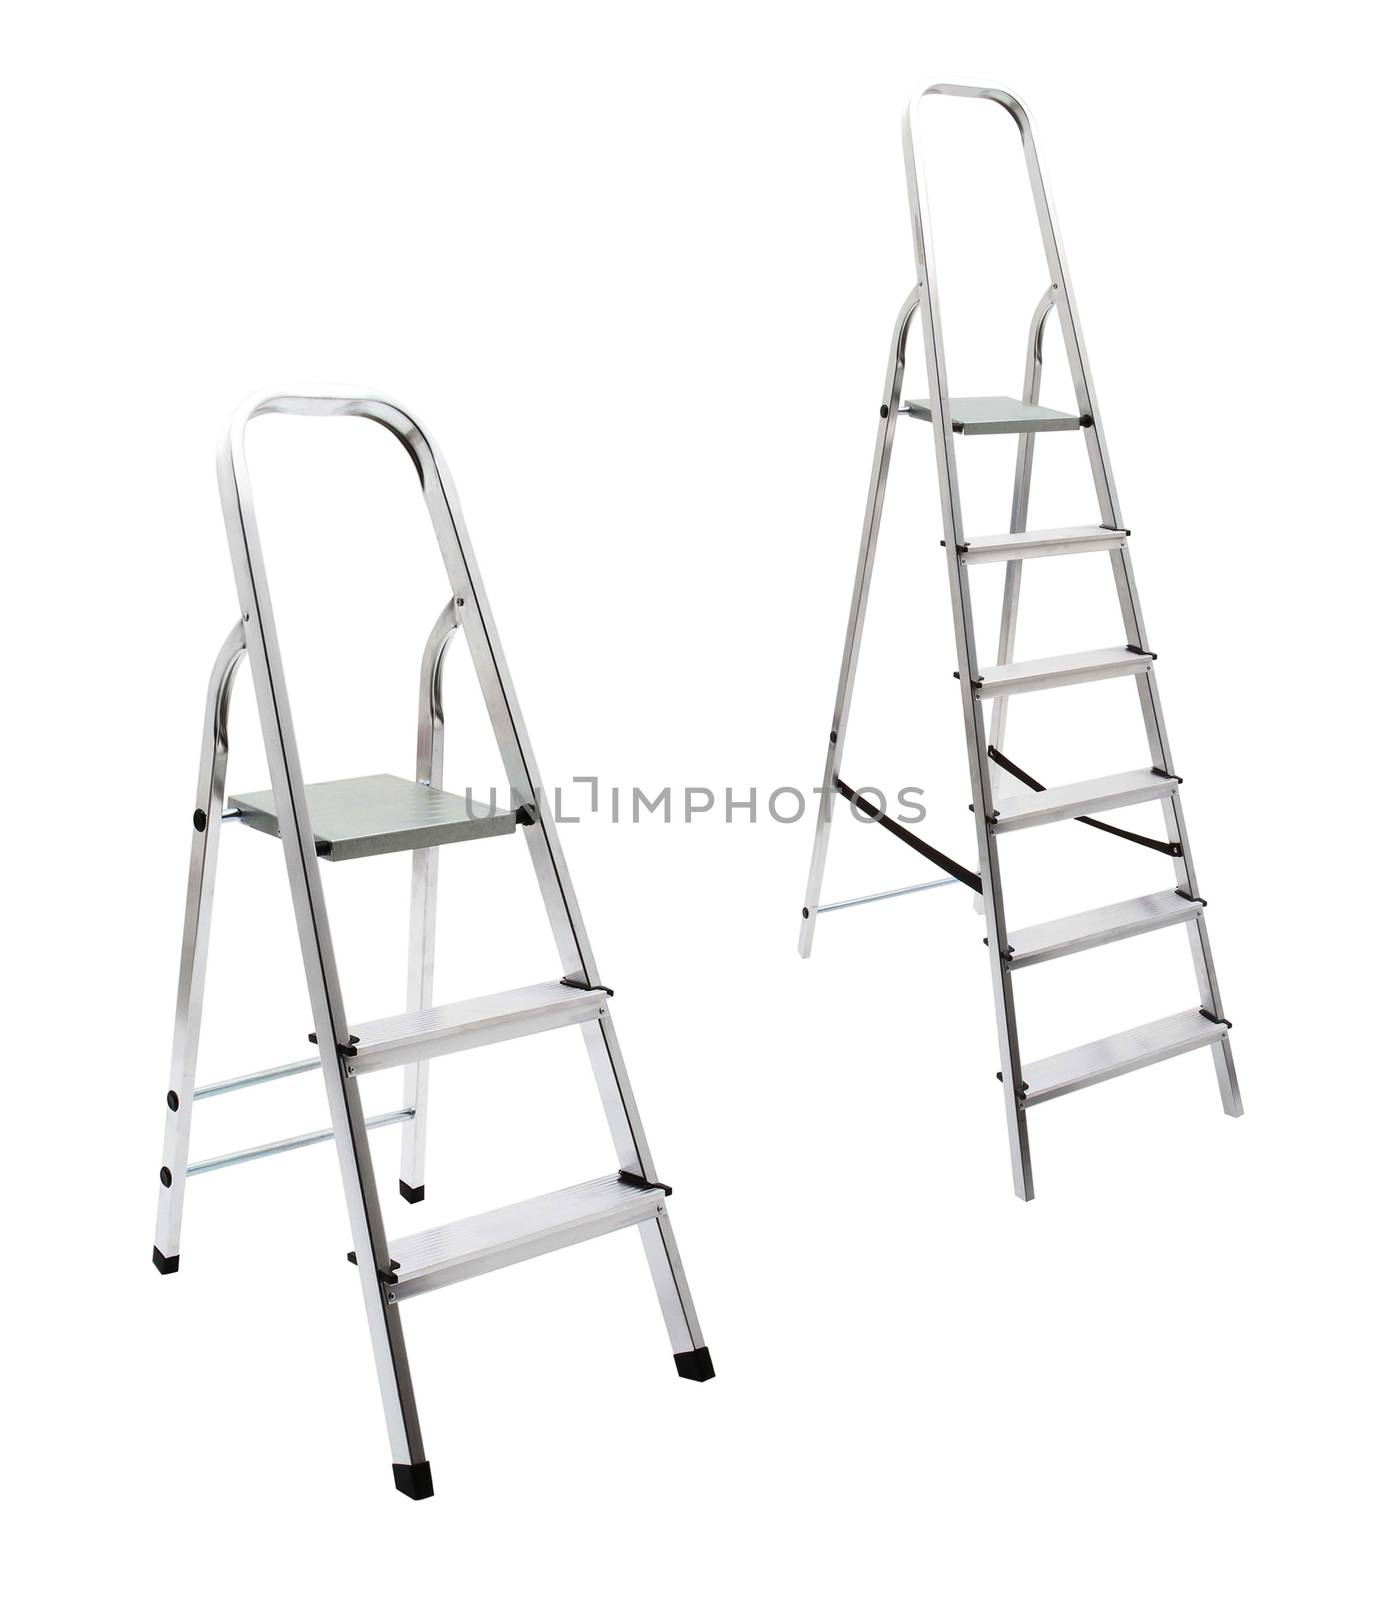 metal ladders isolated  by ozaiachin